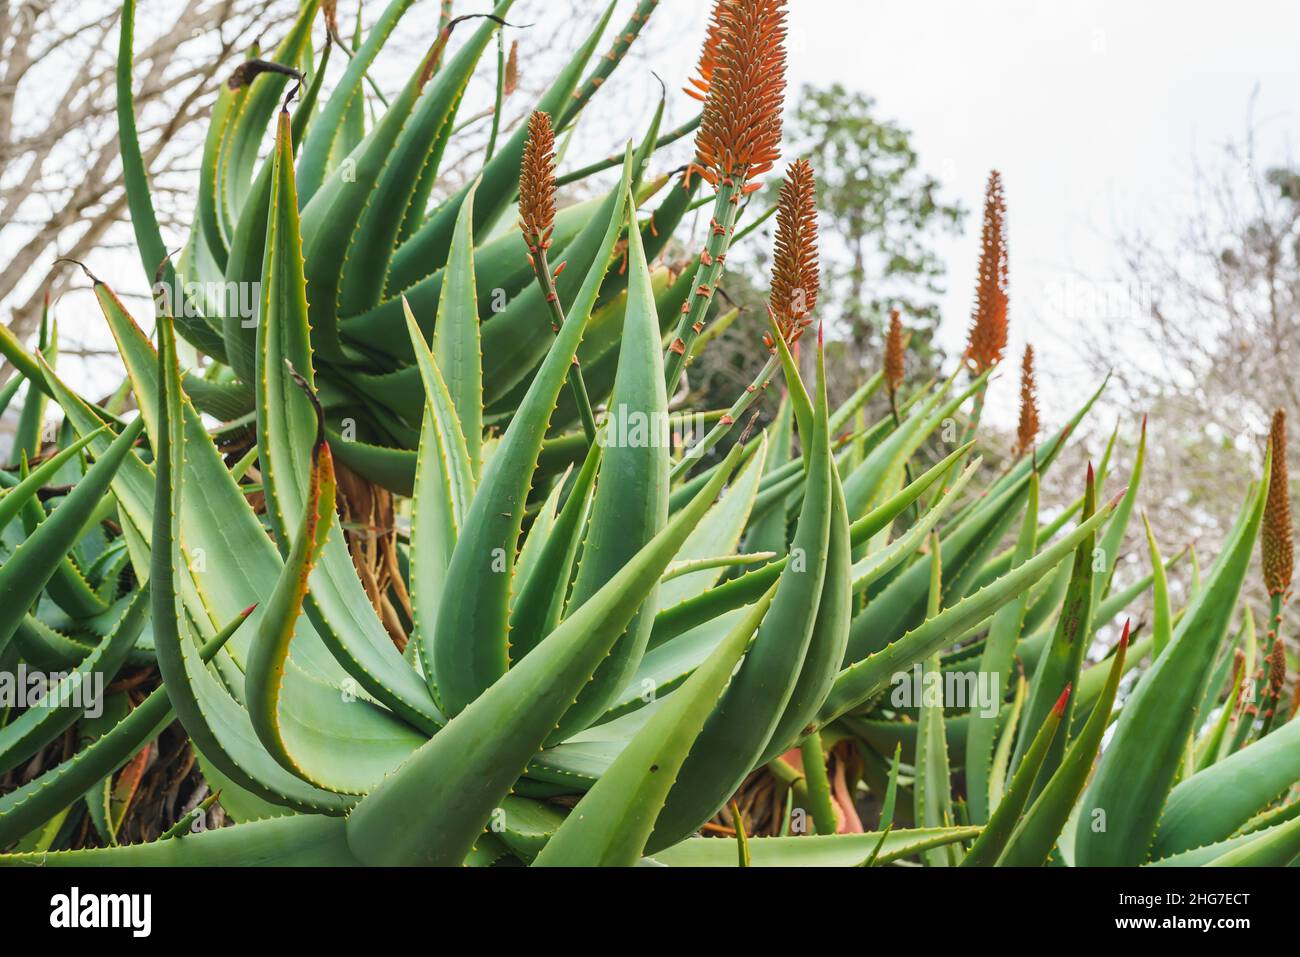 Mountain Aloe (Aloe marlothii) close up in bloom in the garden. Mountain Aloe is a large evergreen succulent, it grows up to 8-10 ft tall Stock Photo